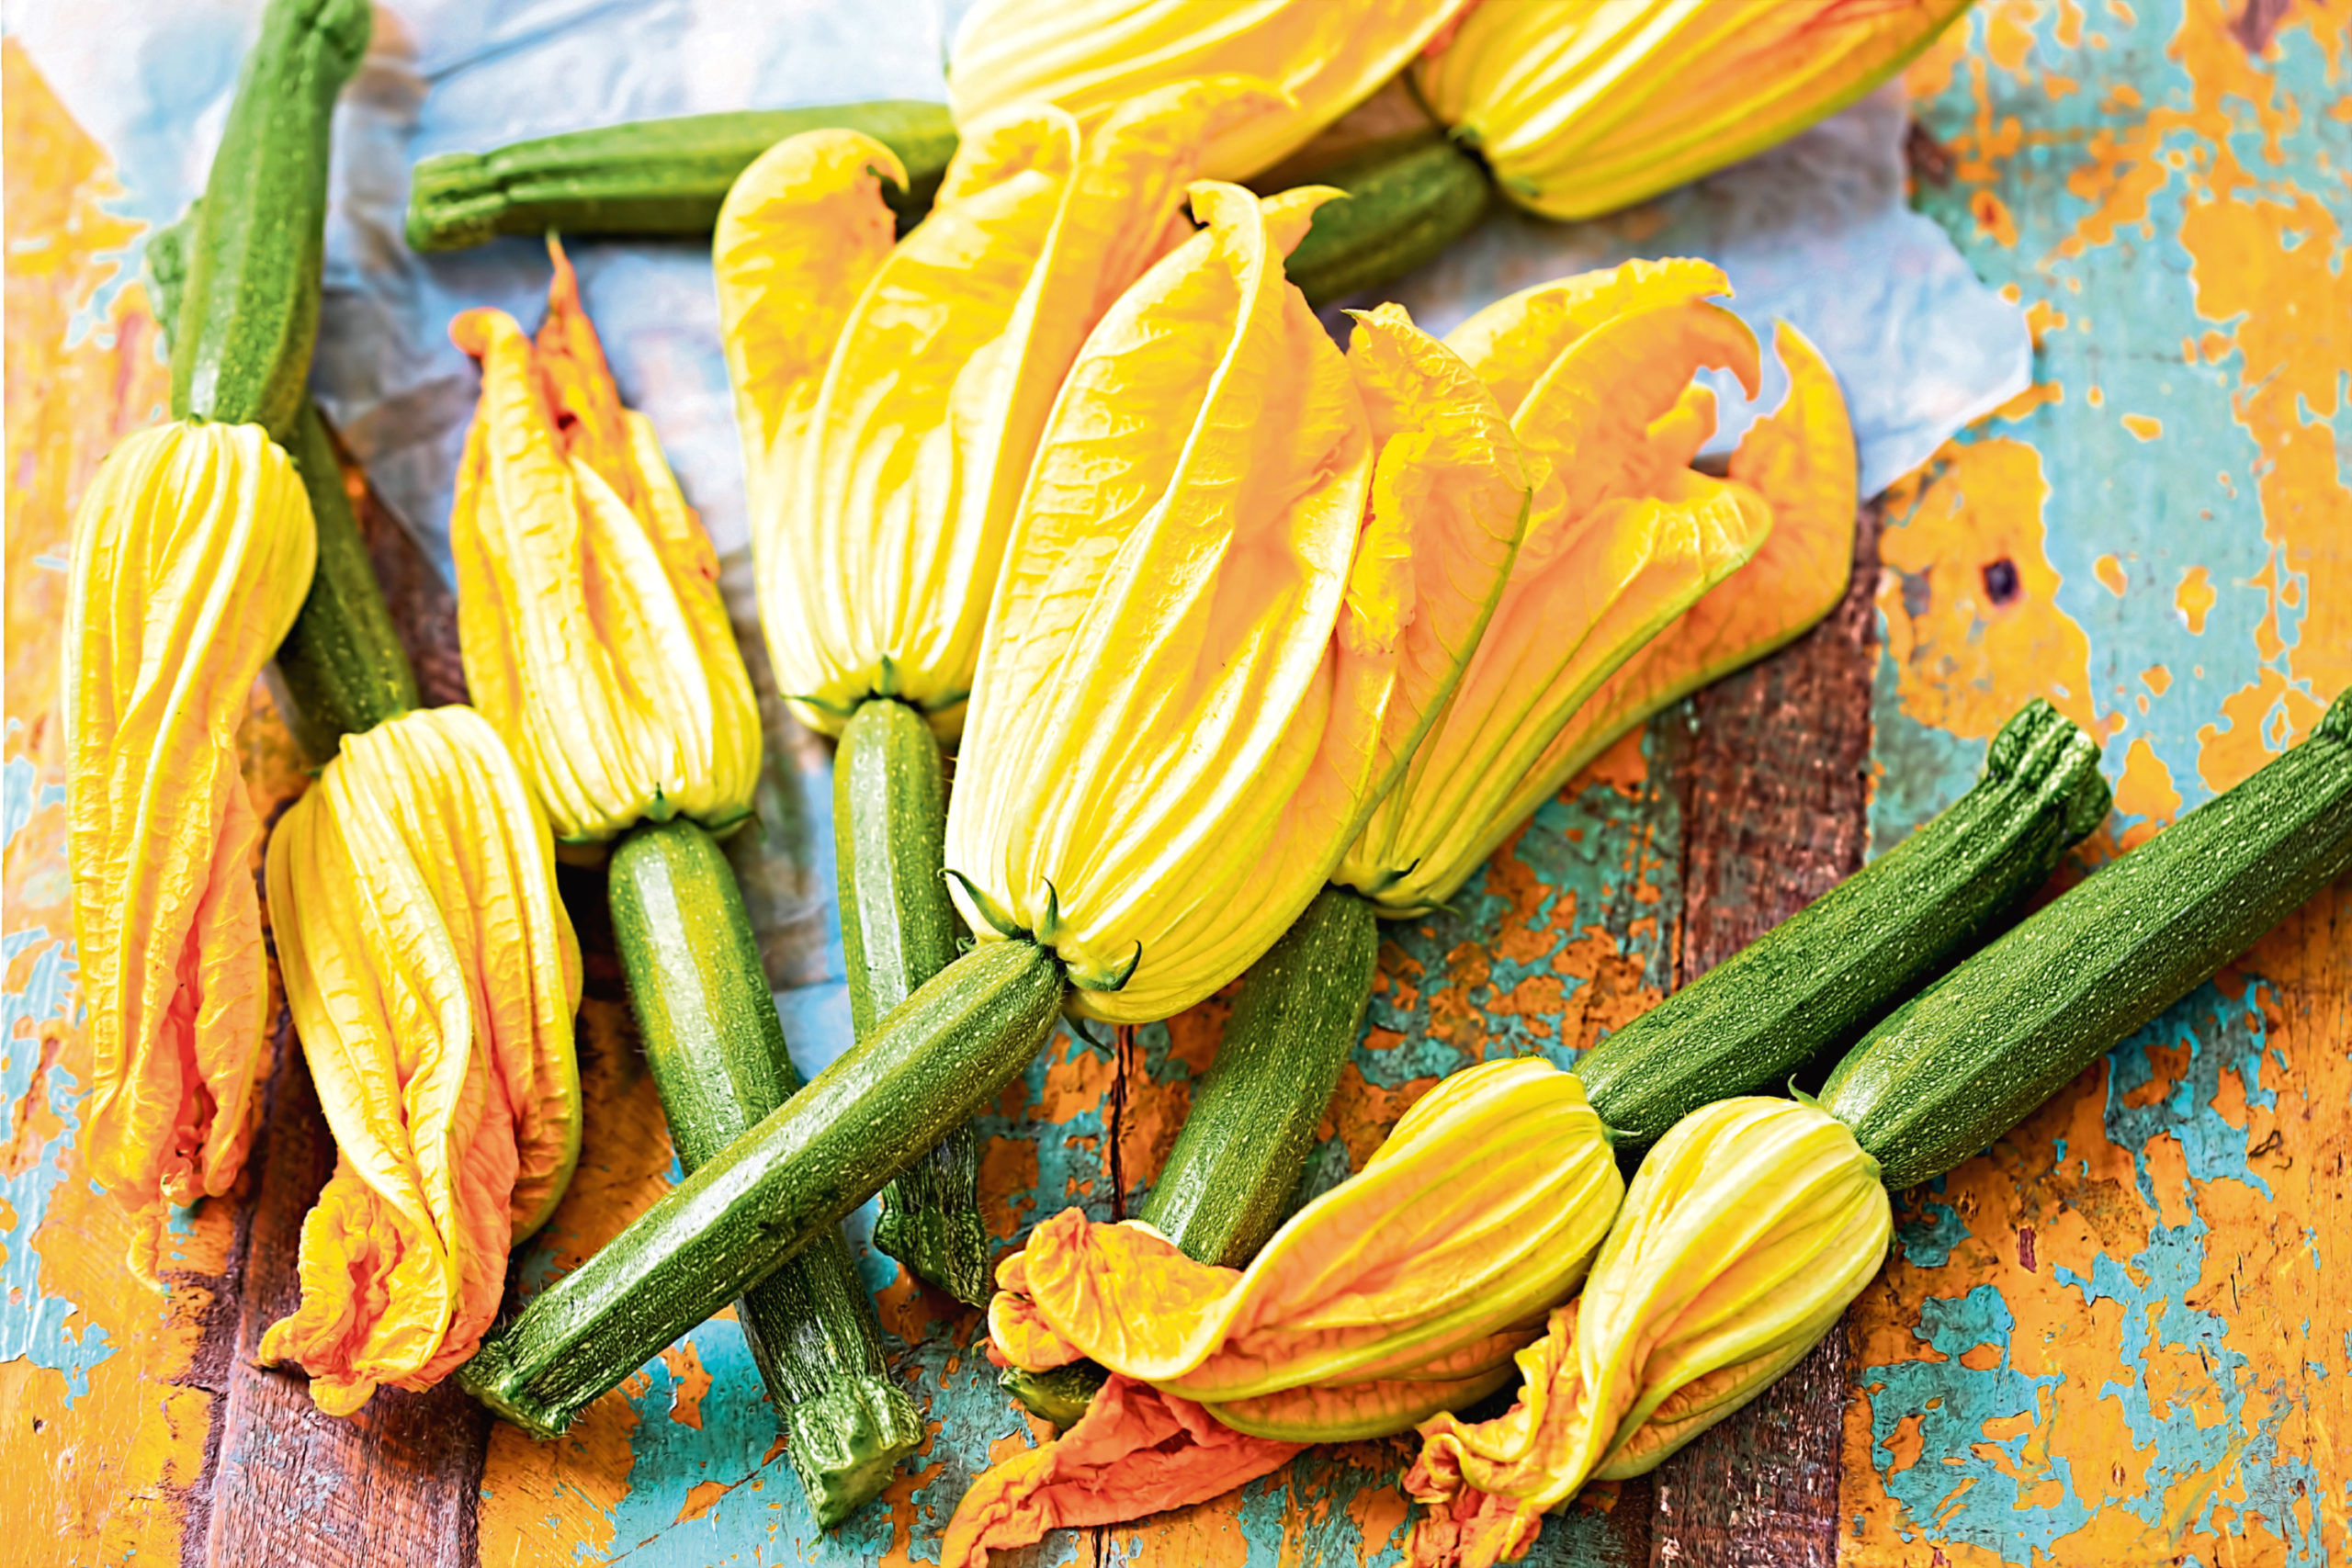 Courgette flowers, deep fried, are a tasty treat